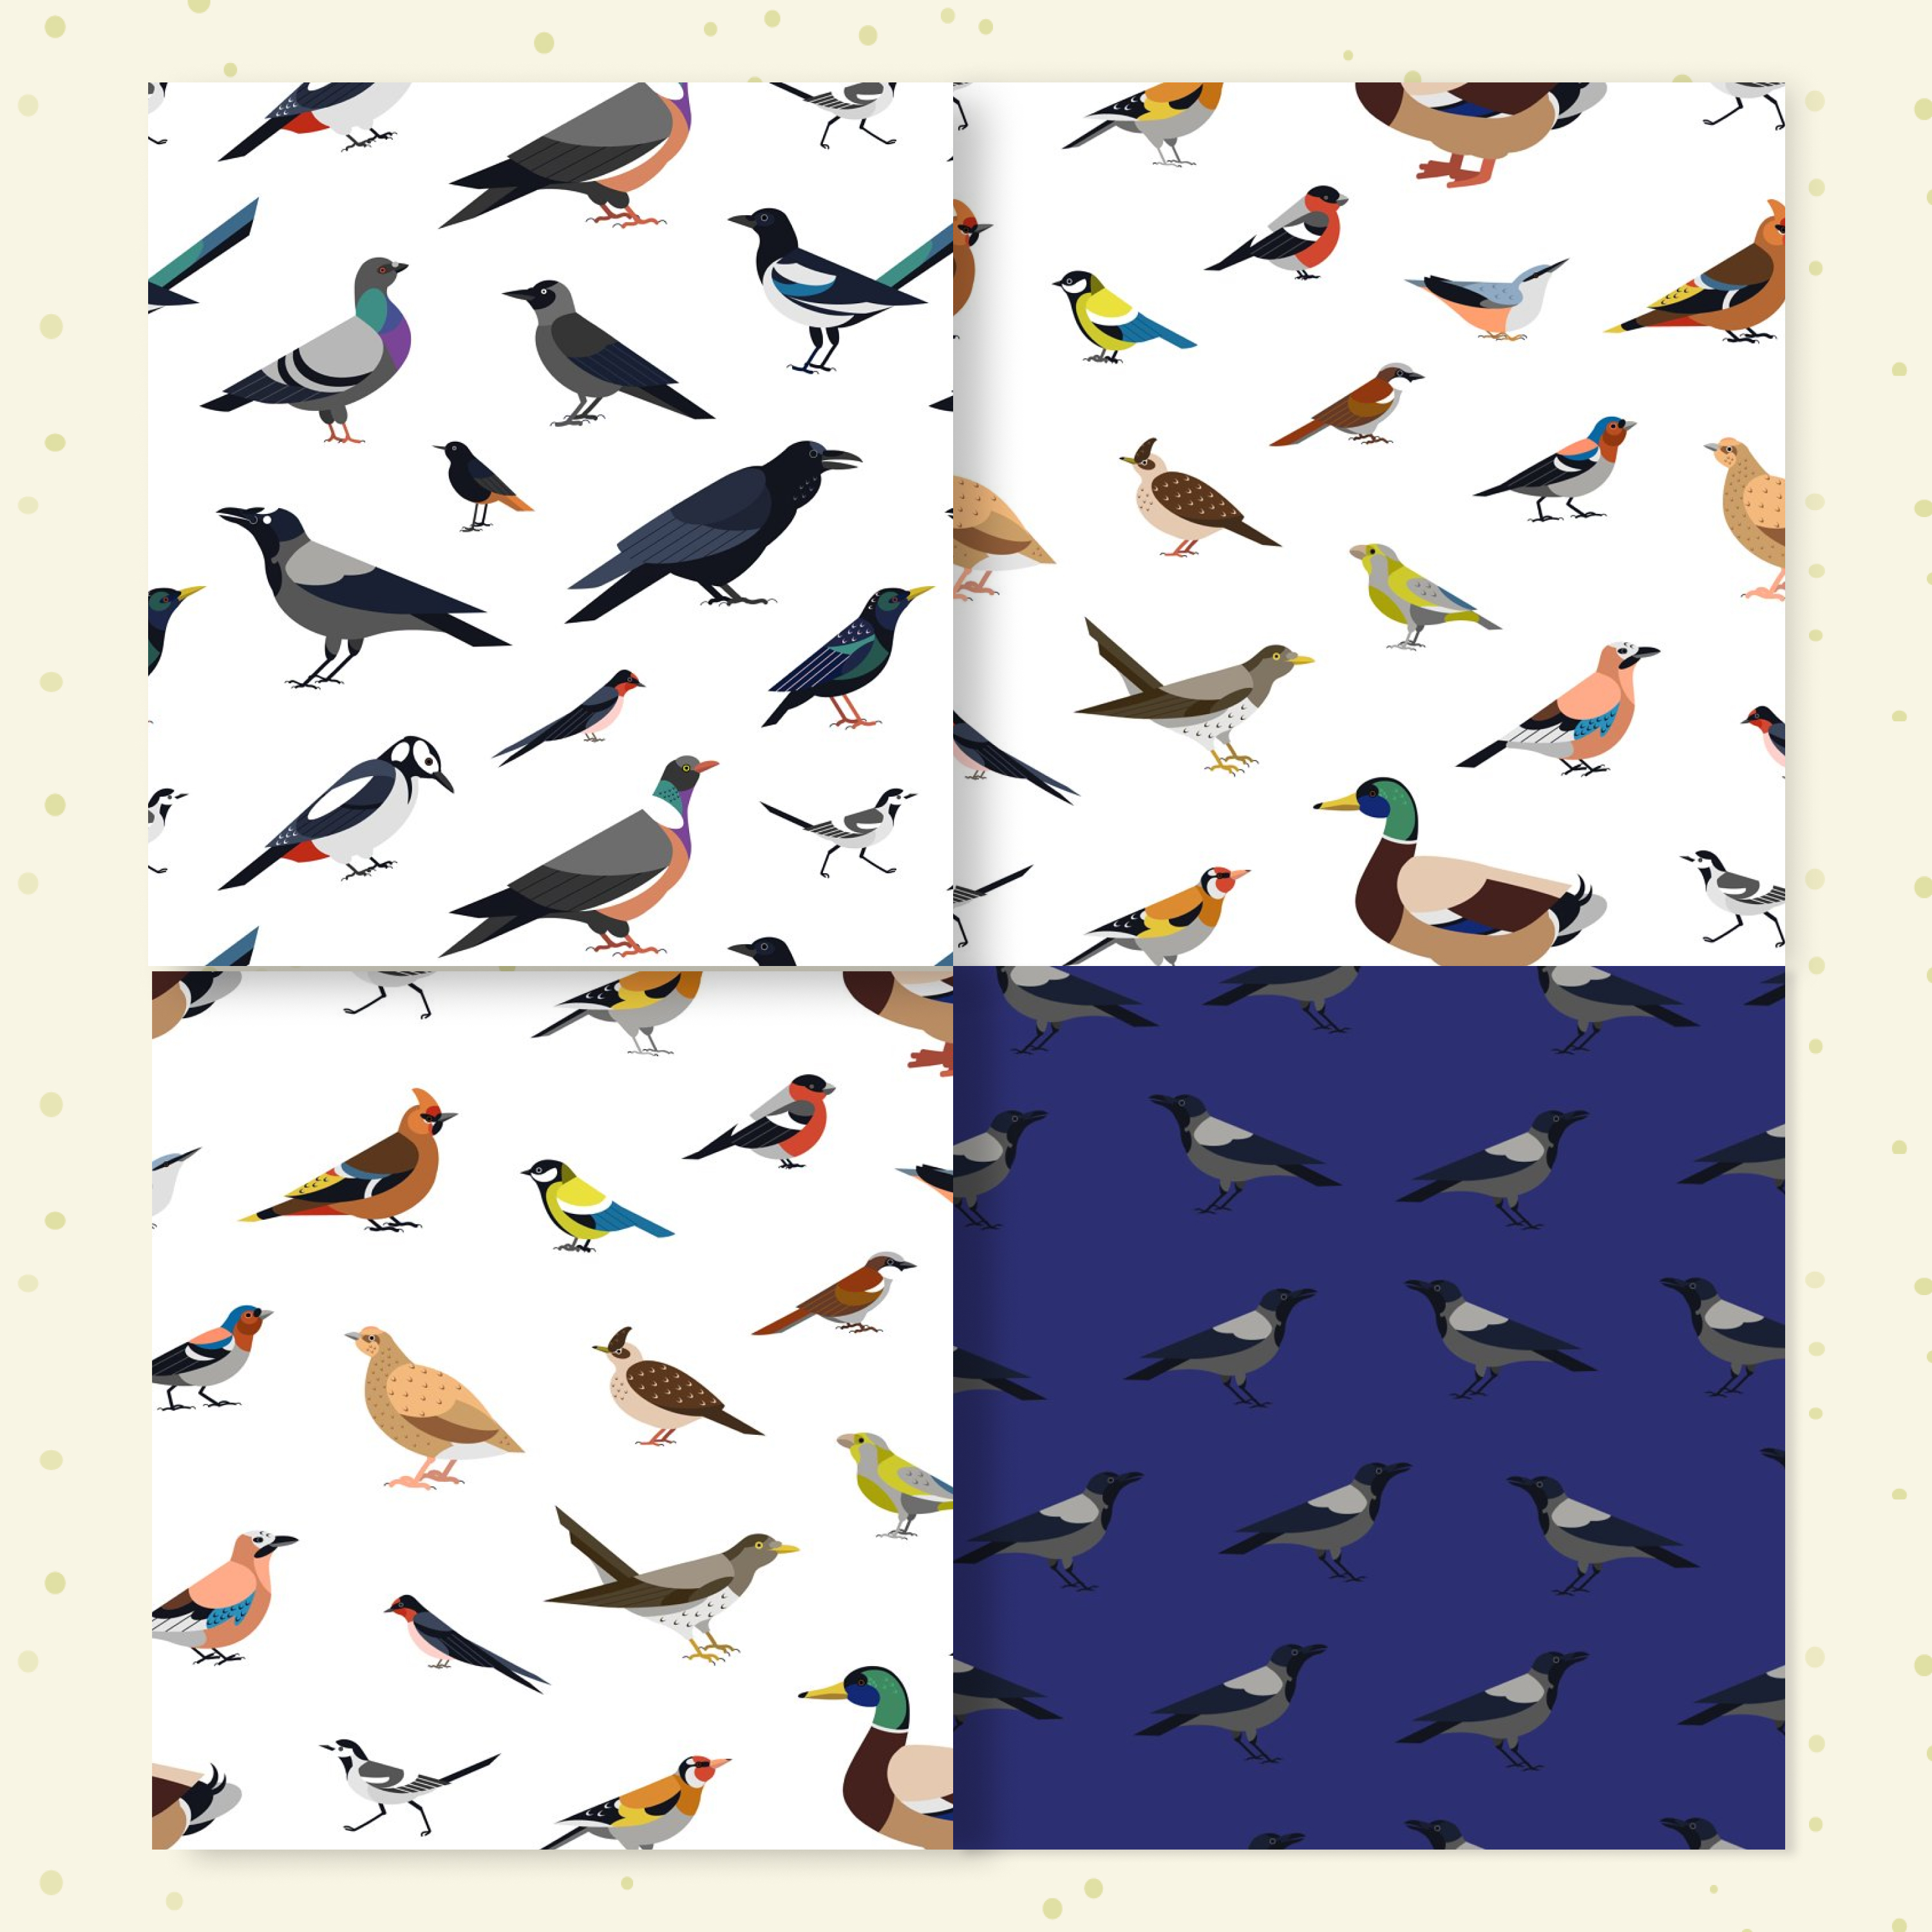 A variety of birds in the image.